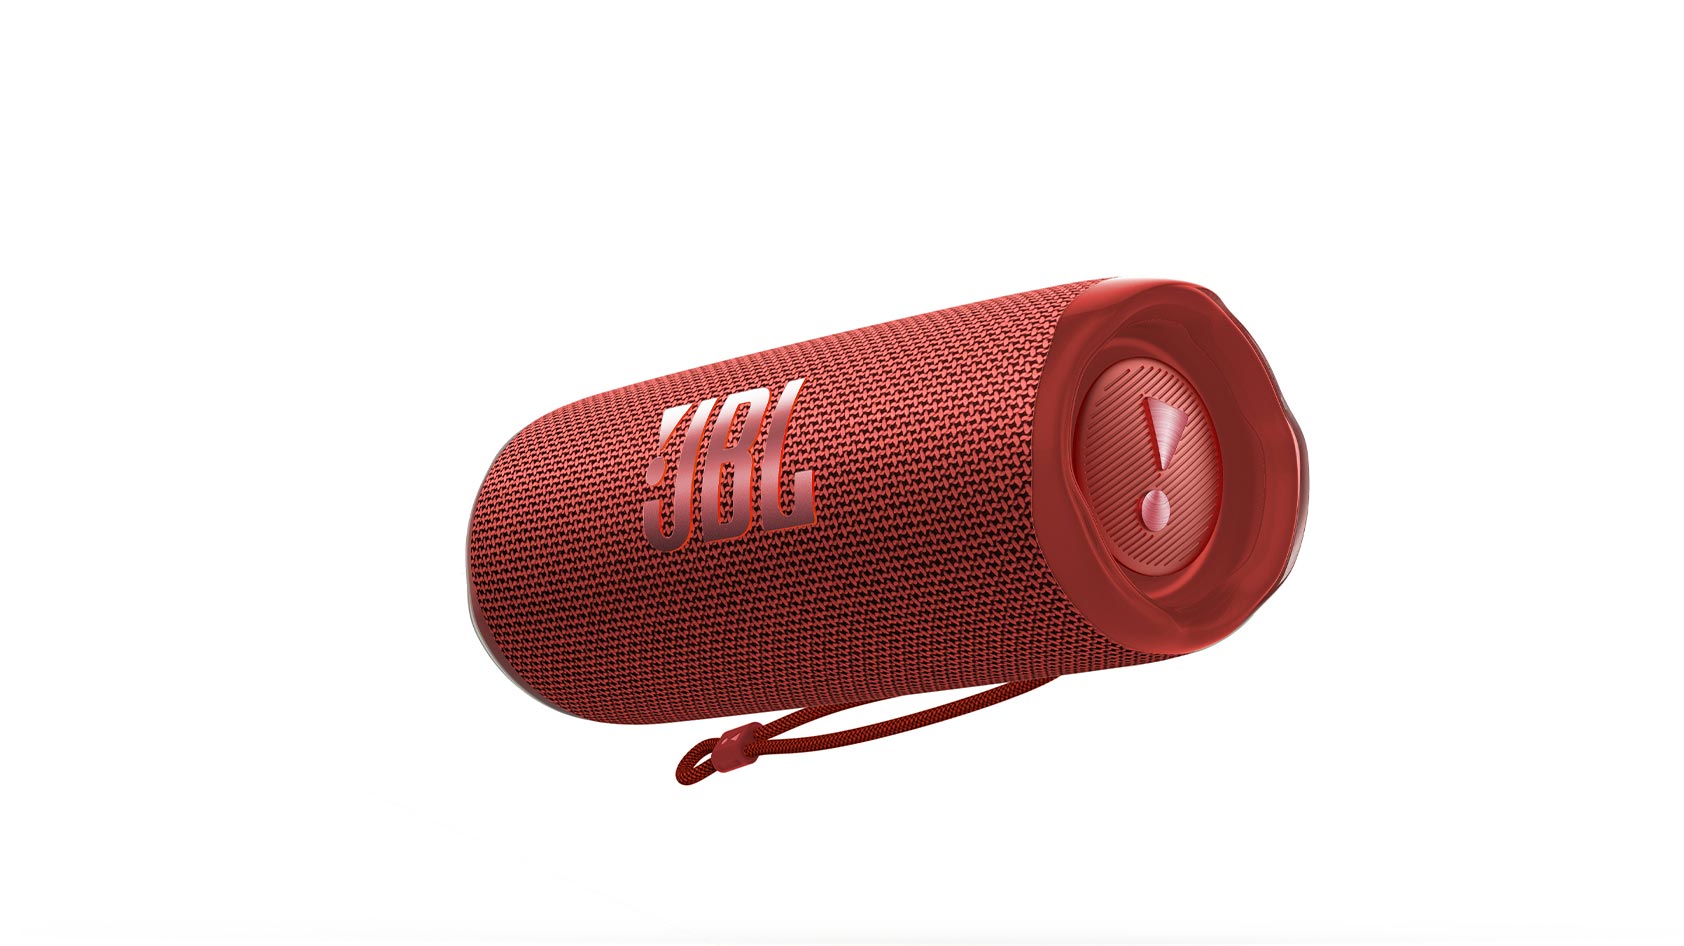 The JBL FLIP 6 in red against a white background.